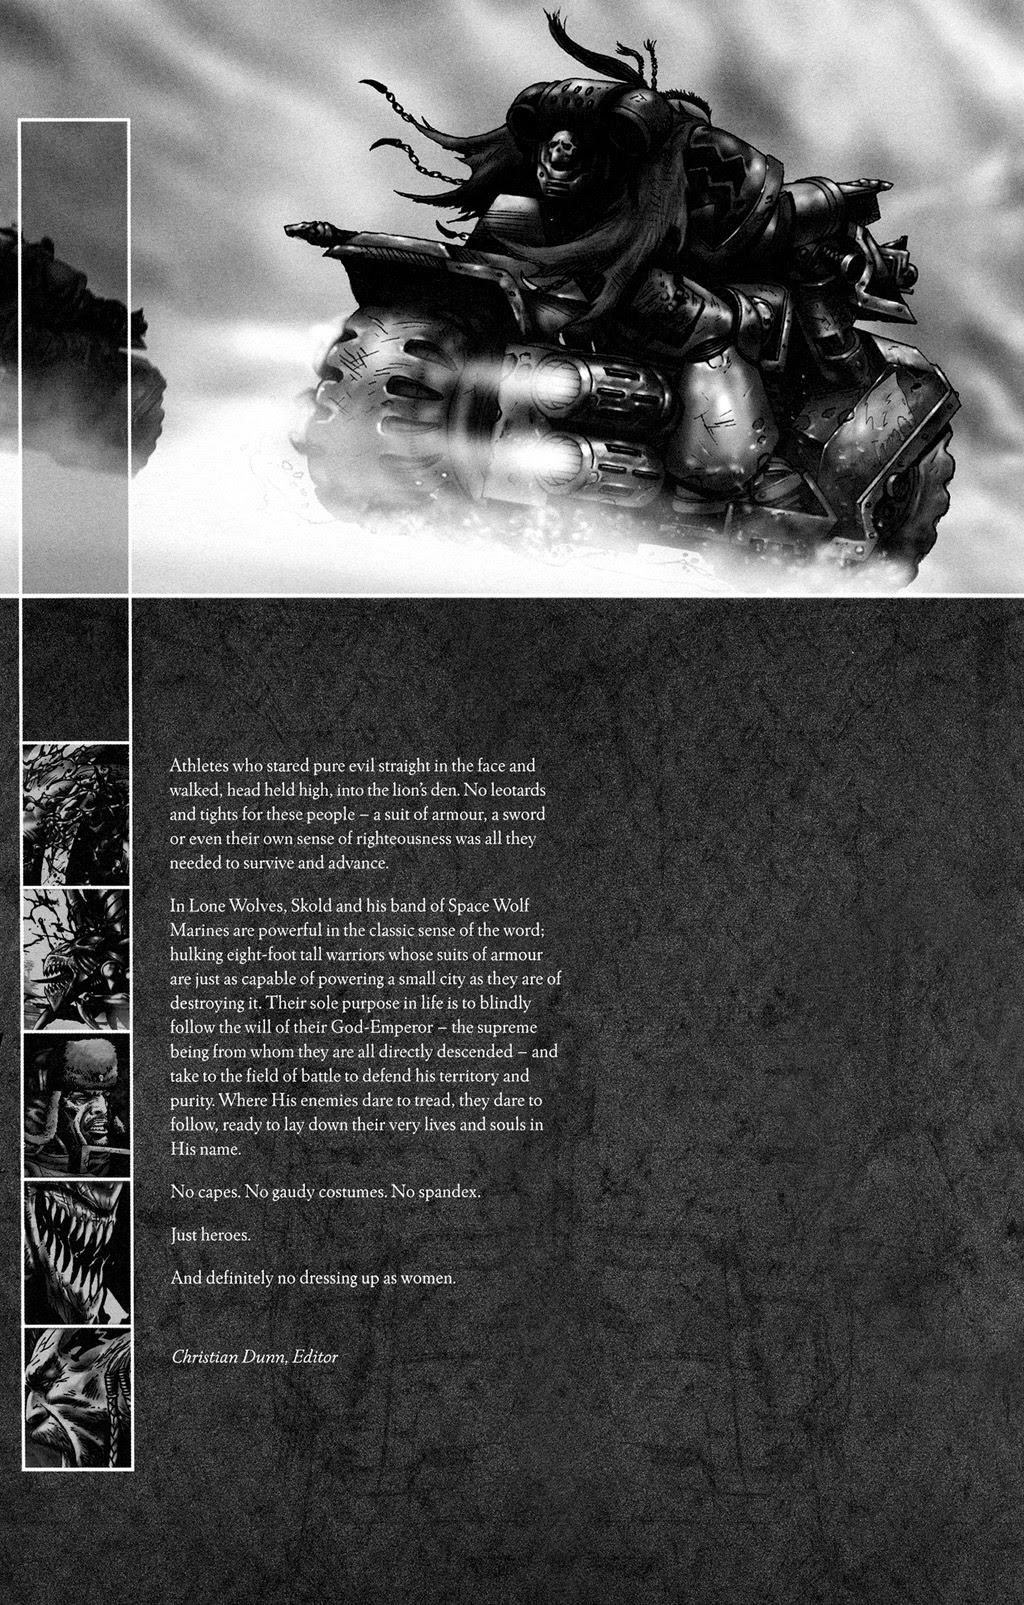 Read online Warhammer 40,000: Lone Wolves comic -  Issue # TPB - 5